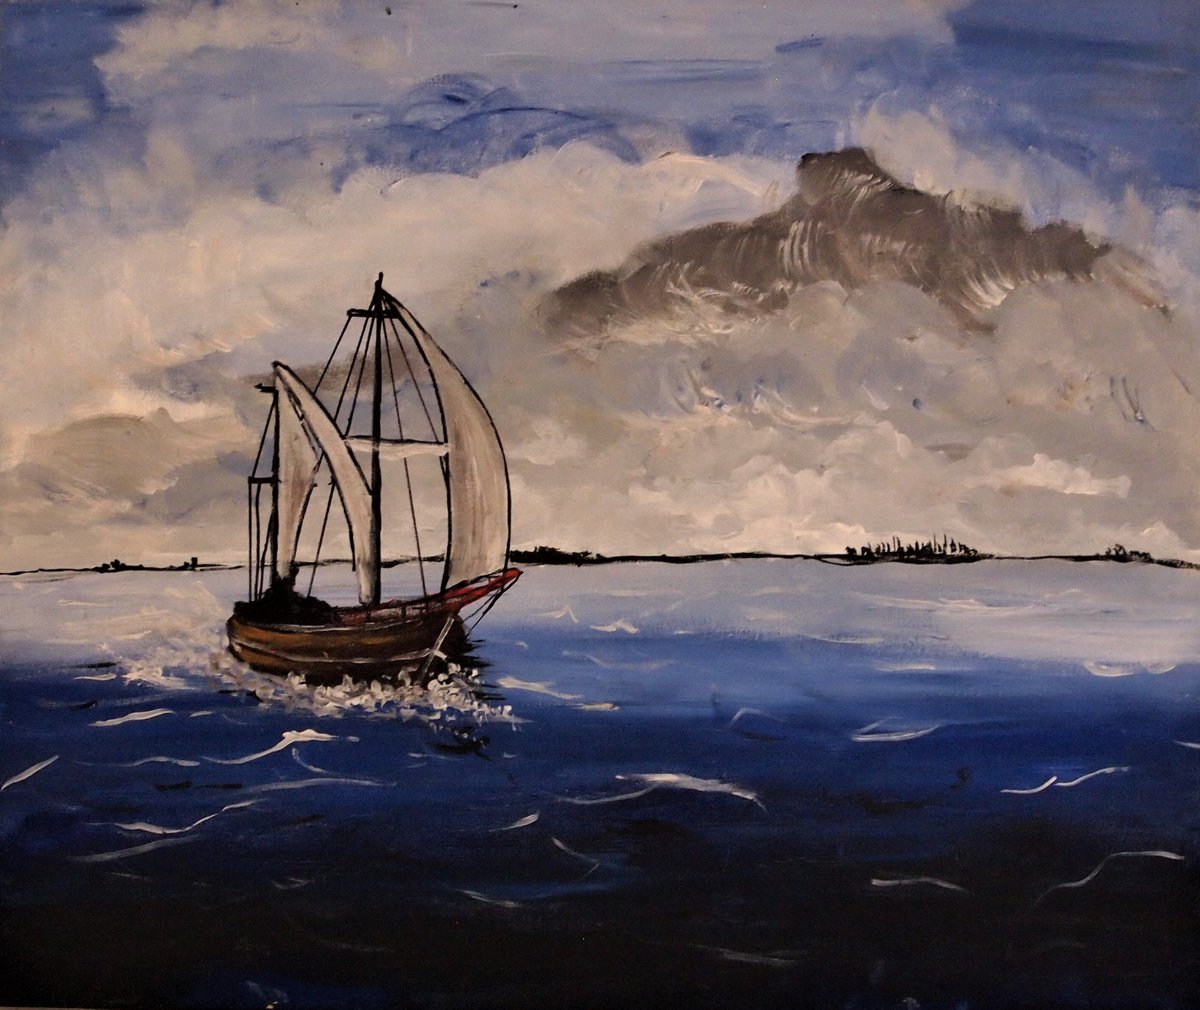 Sailing Stormy weather by Steph Morgan